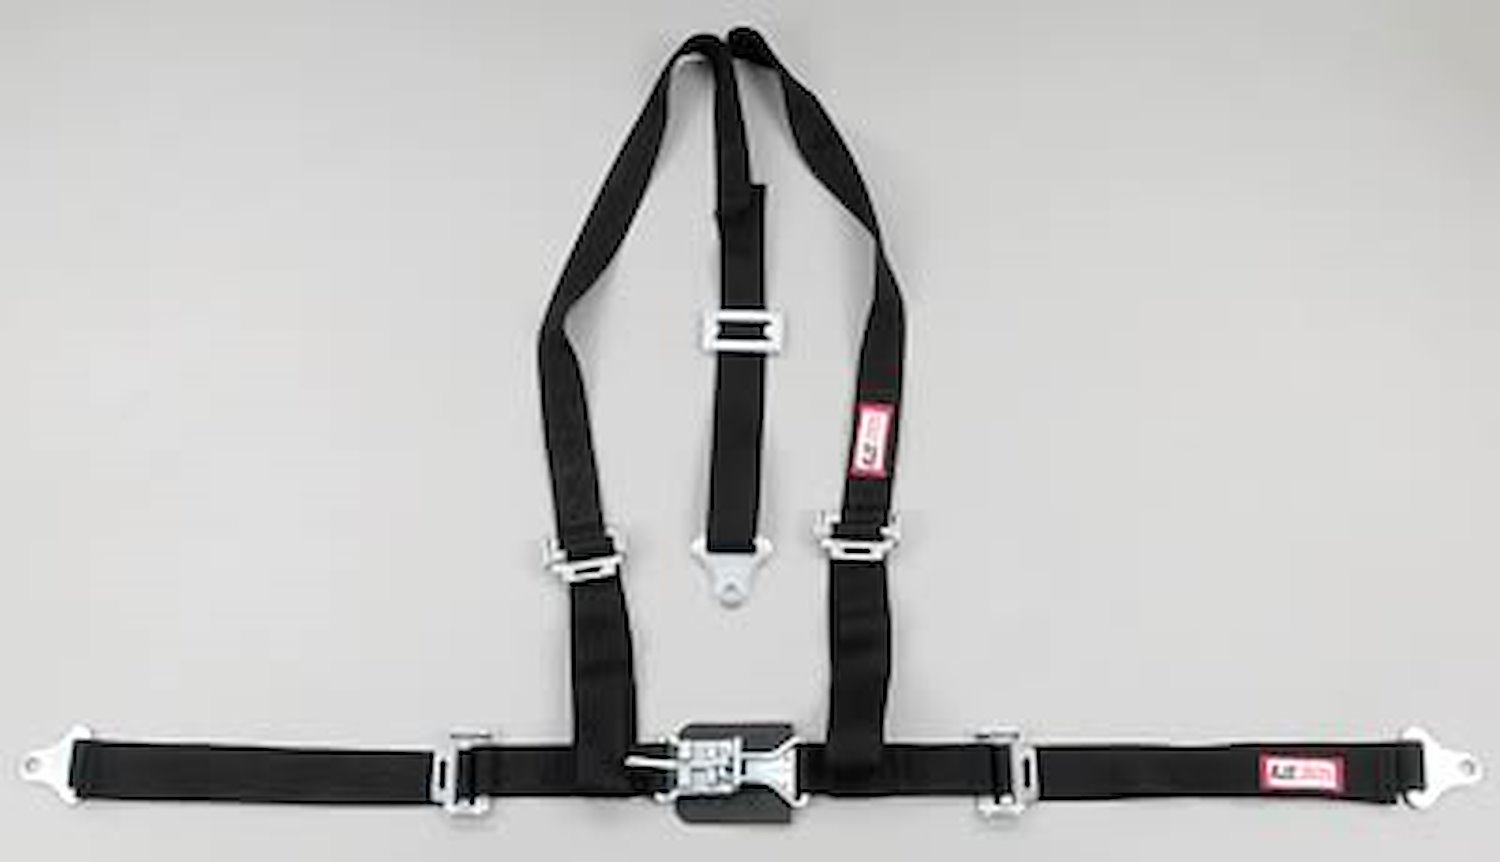 NON-SFI L&L HARNESS 2 PULL DOWN Lap Belt SNAP SEWN IN 2 S.H. Y FLOOR Mount w/STERNUM STRAP WRAP/SNAP HOT PINK